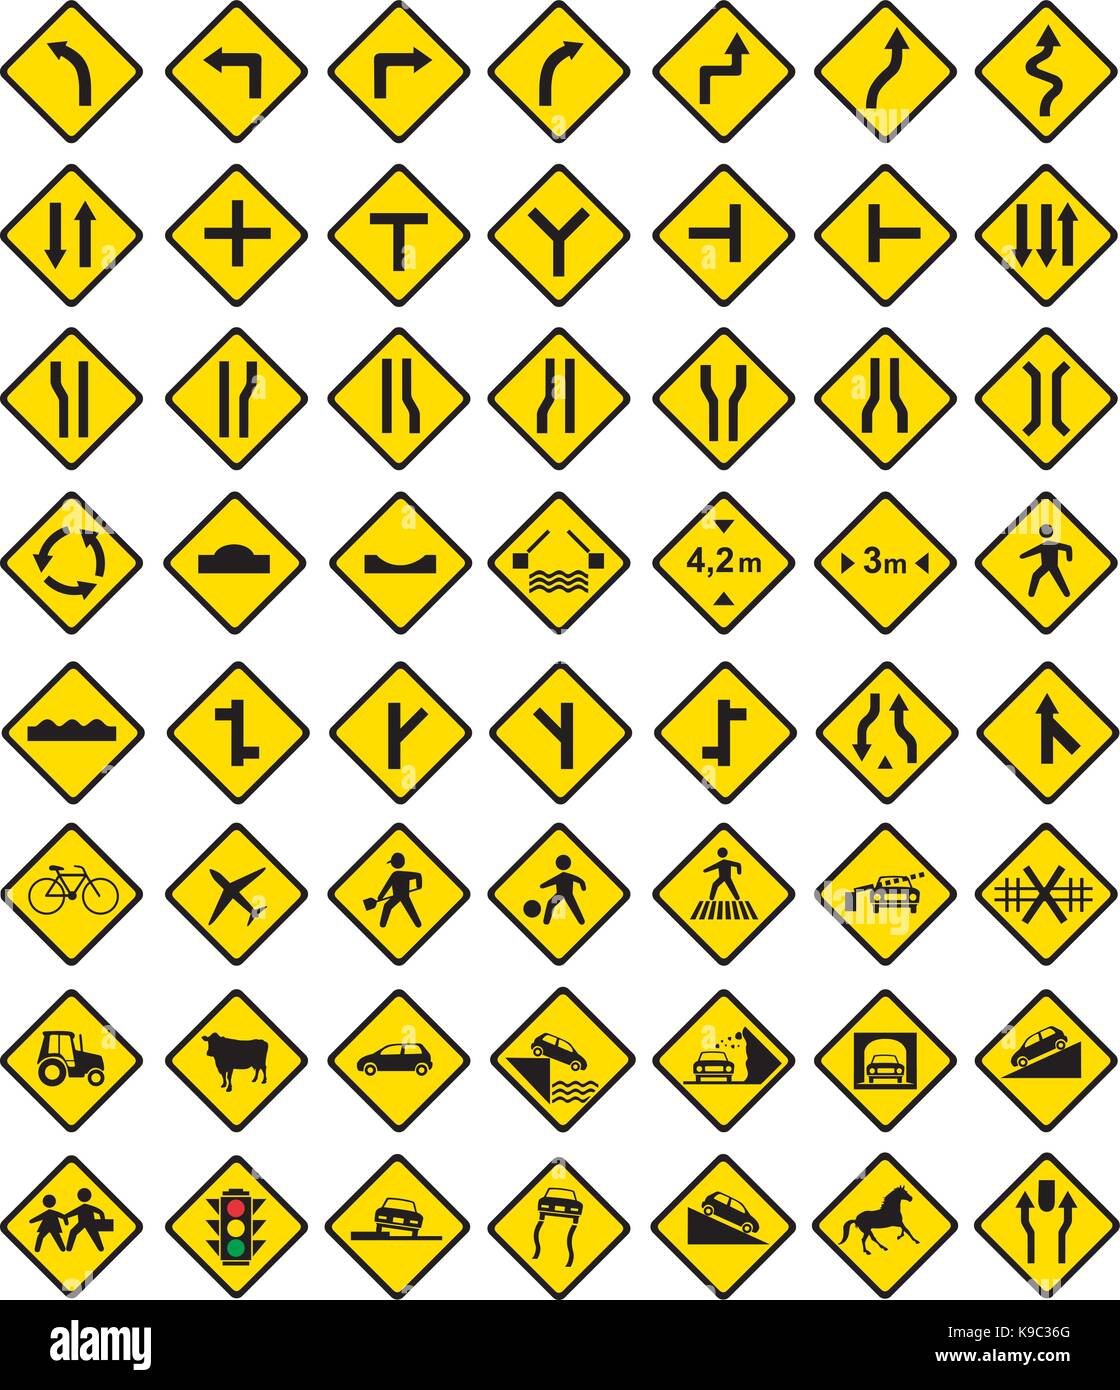 Group of illustrator road warning signs Stock Vector